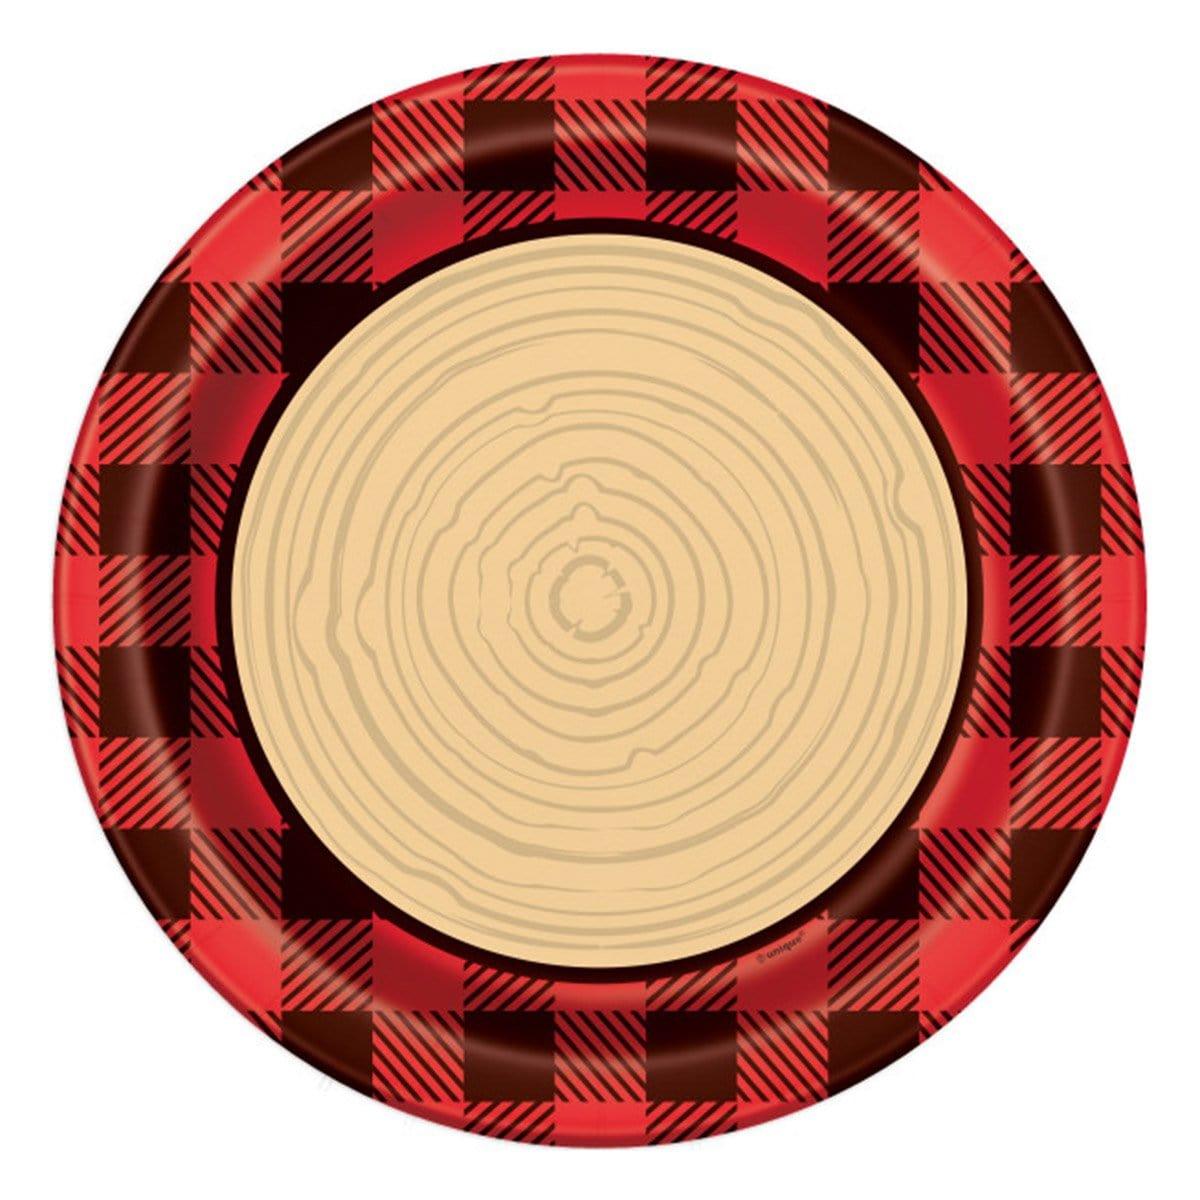 Buy Everyday Entertaining Lumberjack Paper Plates 9 Inches, 8 per Package sold at Party Expert